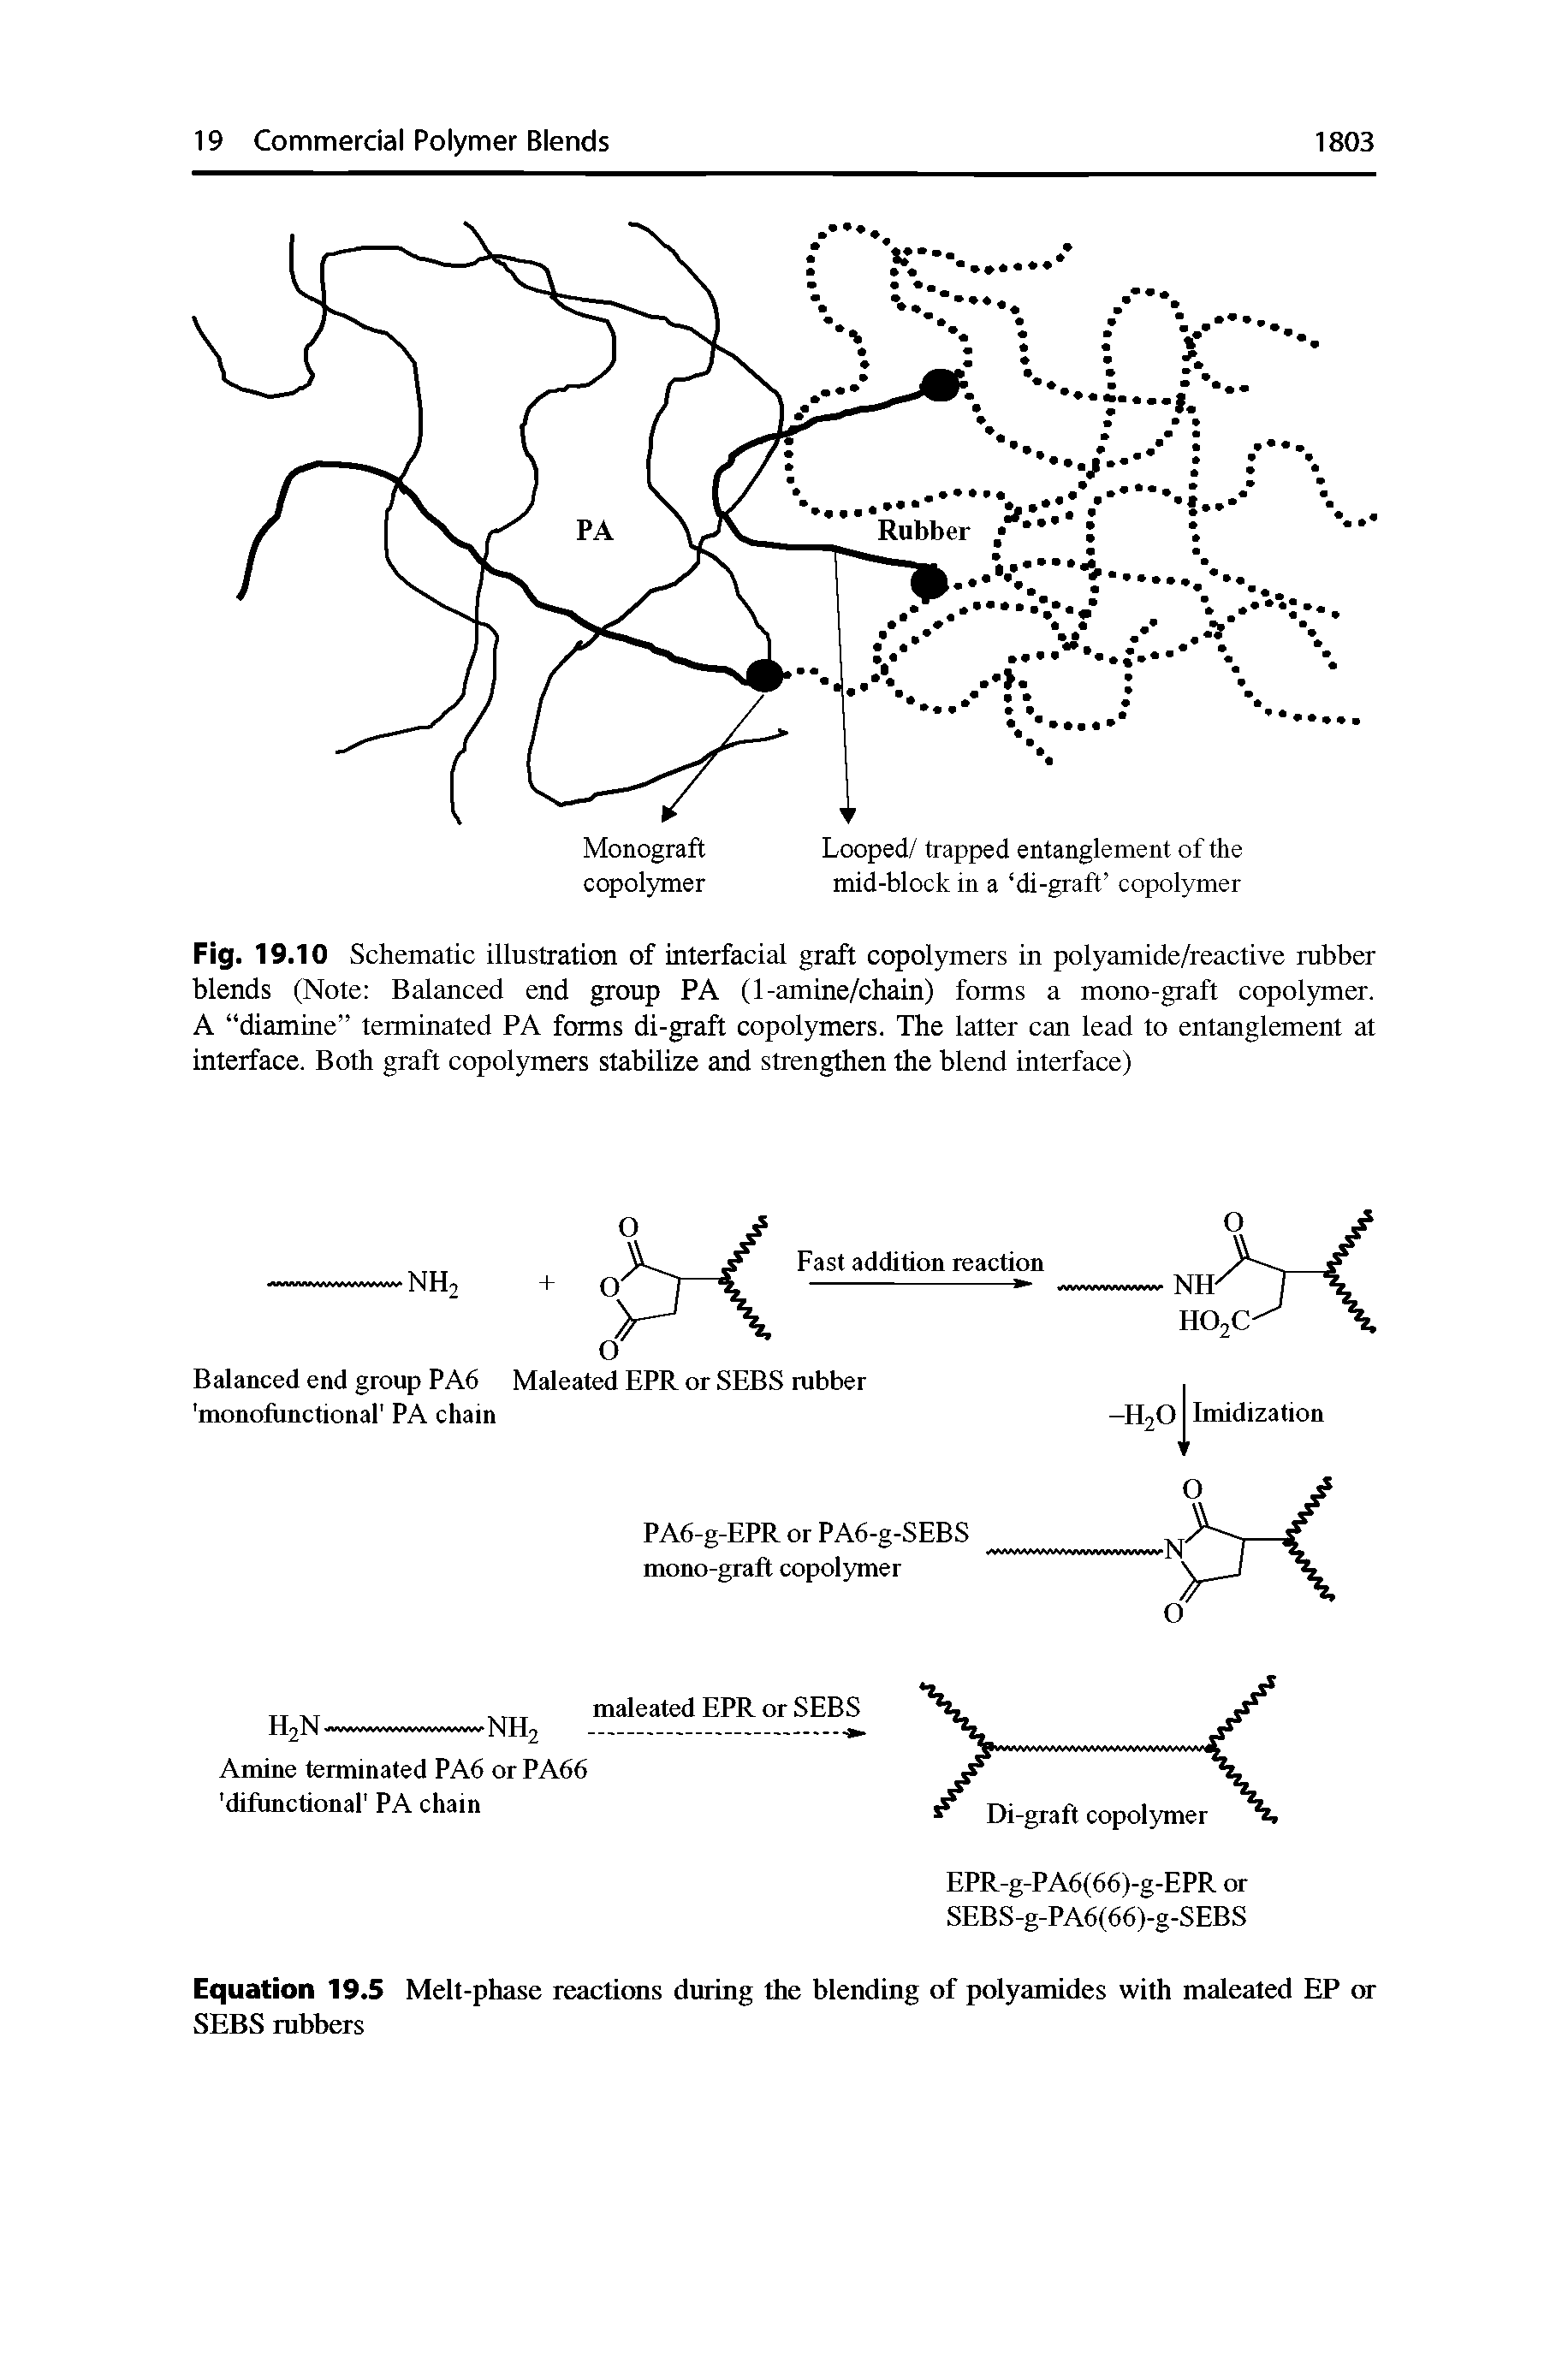 Fig. 19.10 Schematic illustration of interfacial graft copolymers in polyamide/reactive rubber blends (Note Balanced end group PA (1-amine/chain) forms a mono-graft copolymer. A diamine terminated PA forms di-graft copolymers. The latter can lead to entanglement at interface. Both graft copolymers stabilize and strengthen the blend interface)...